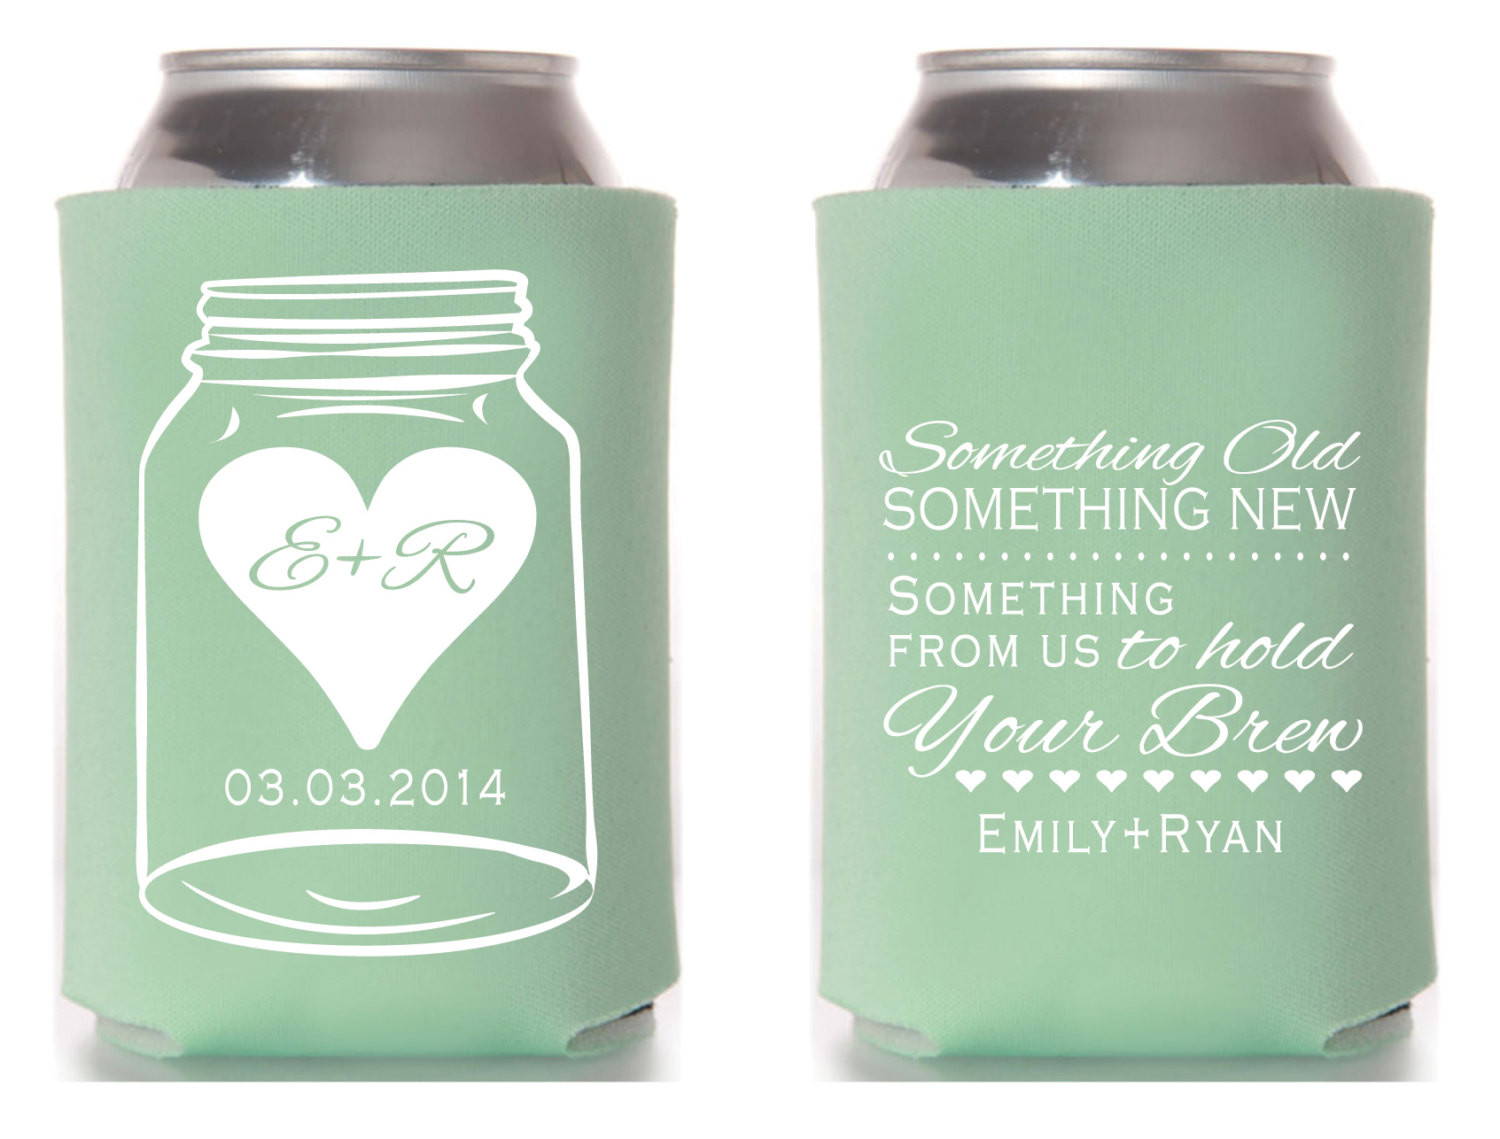 Koozie Wedding Favors
 Request a custom order and have something made just for you